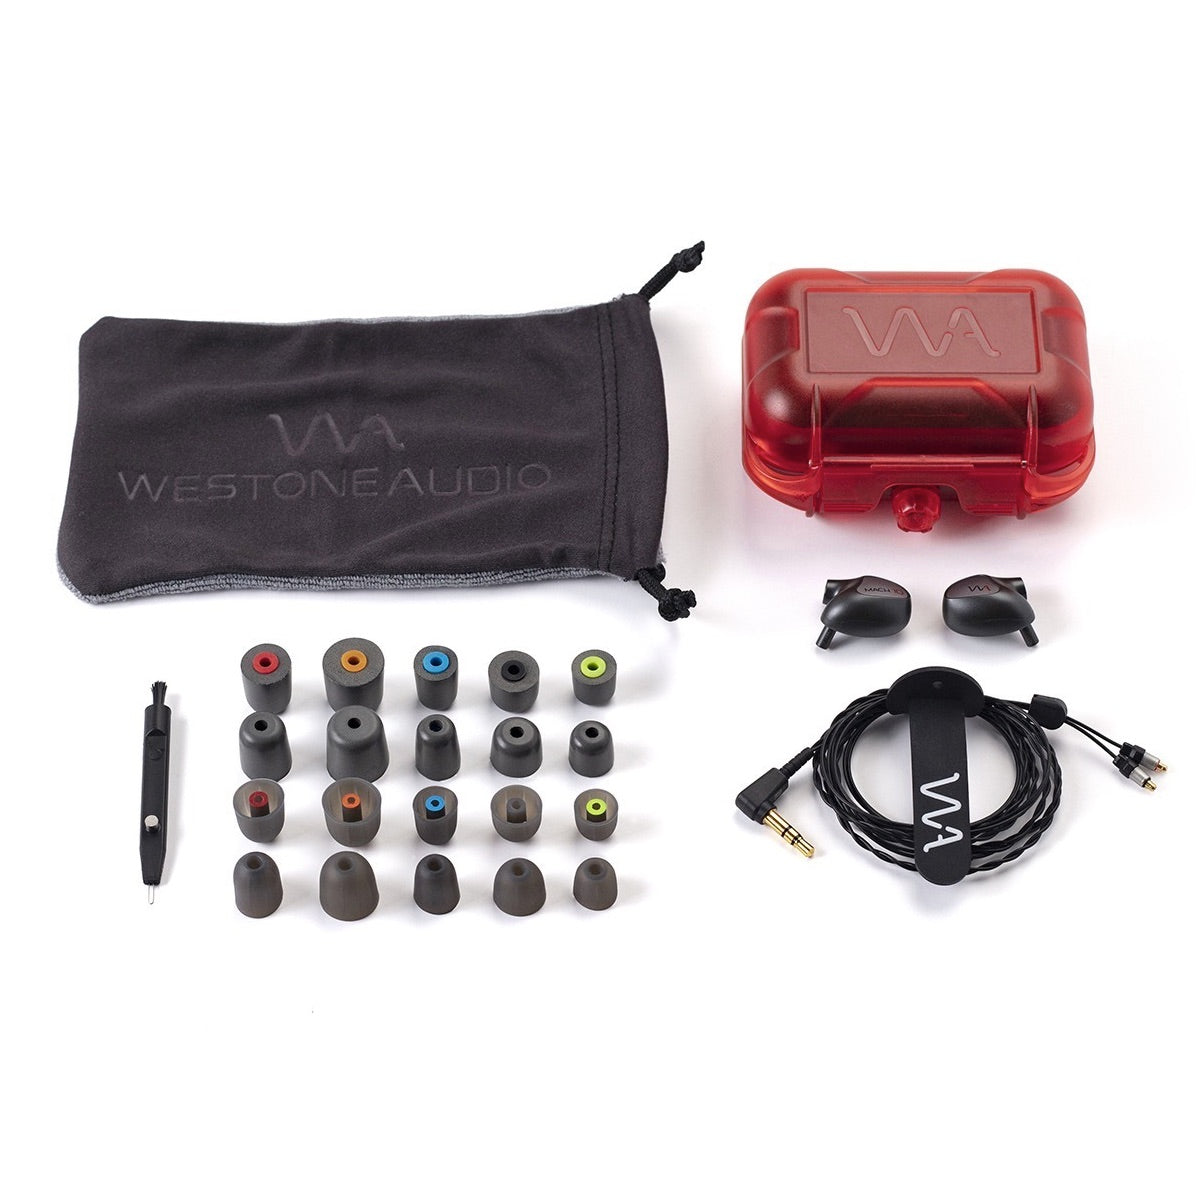 Westone MACH 10 - 1-driver Universal In-ear Monitors, included